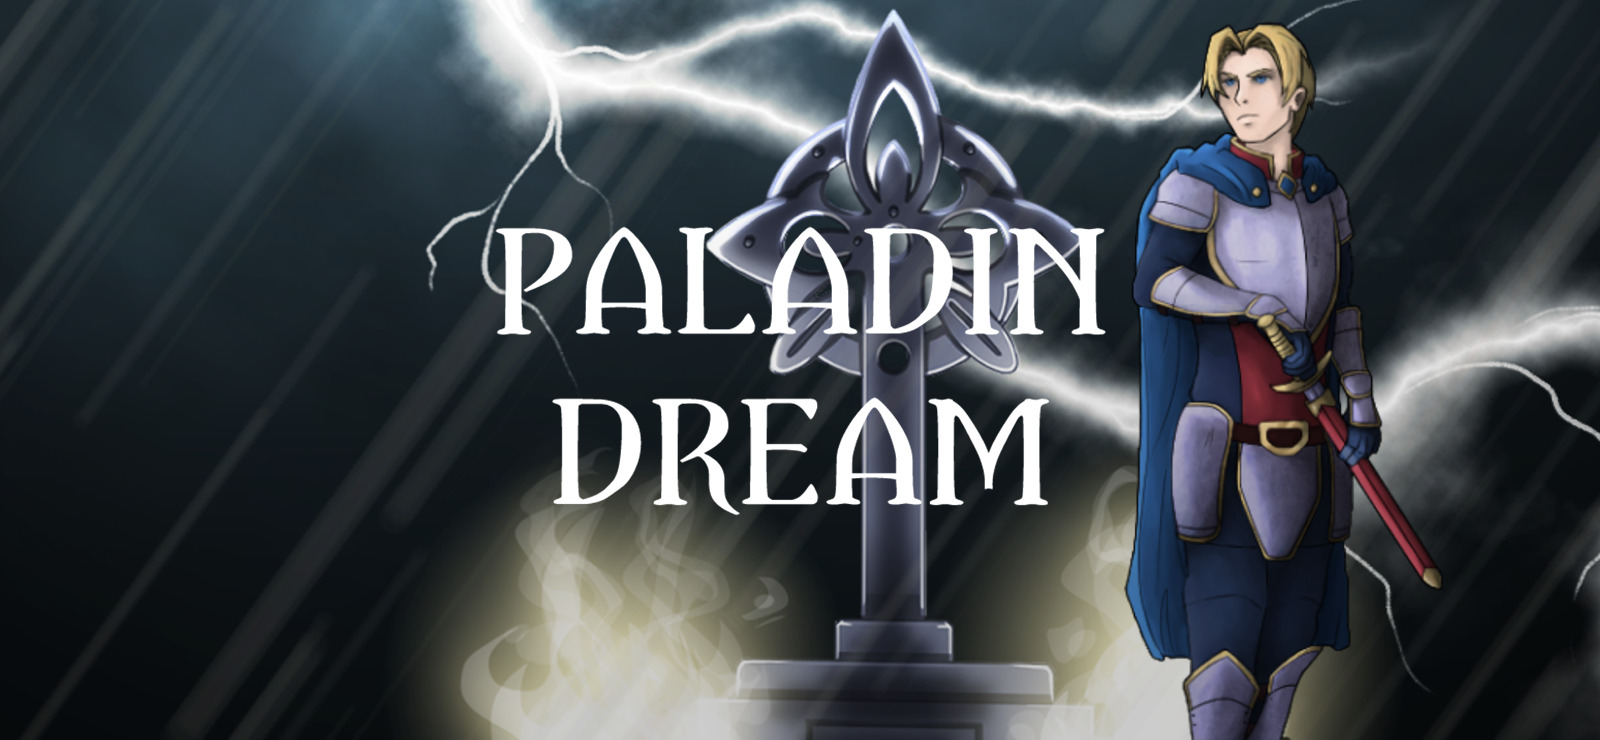 for iphone download Paladin Dream free